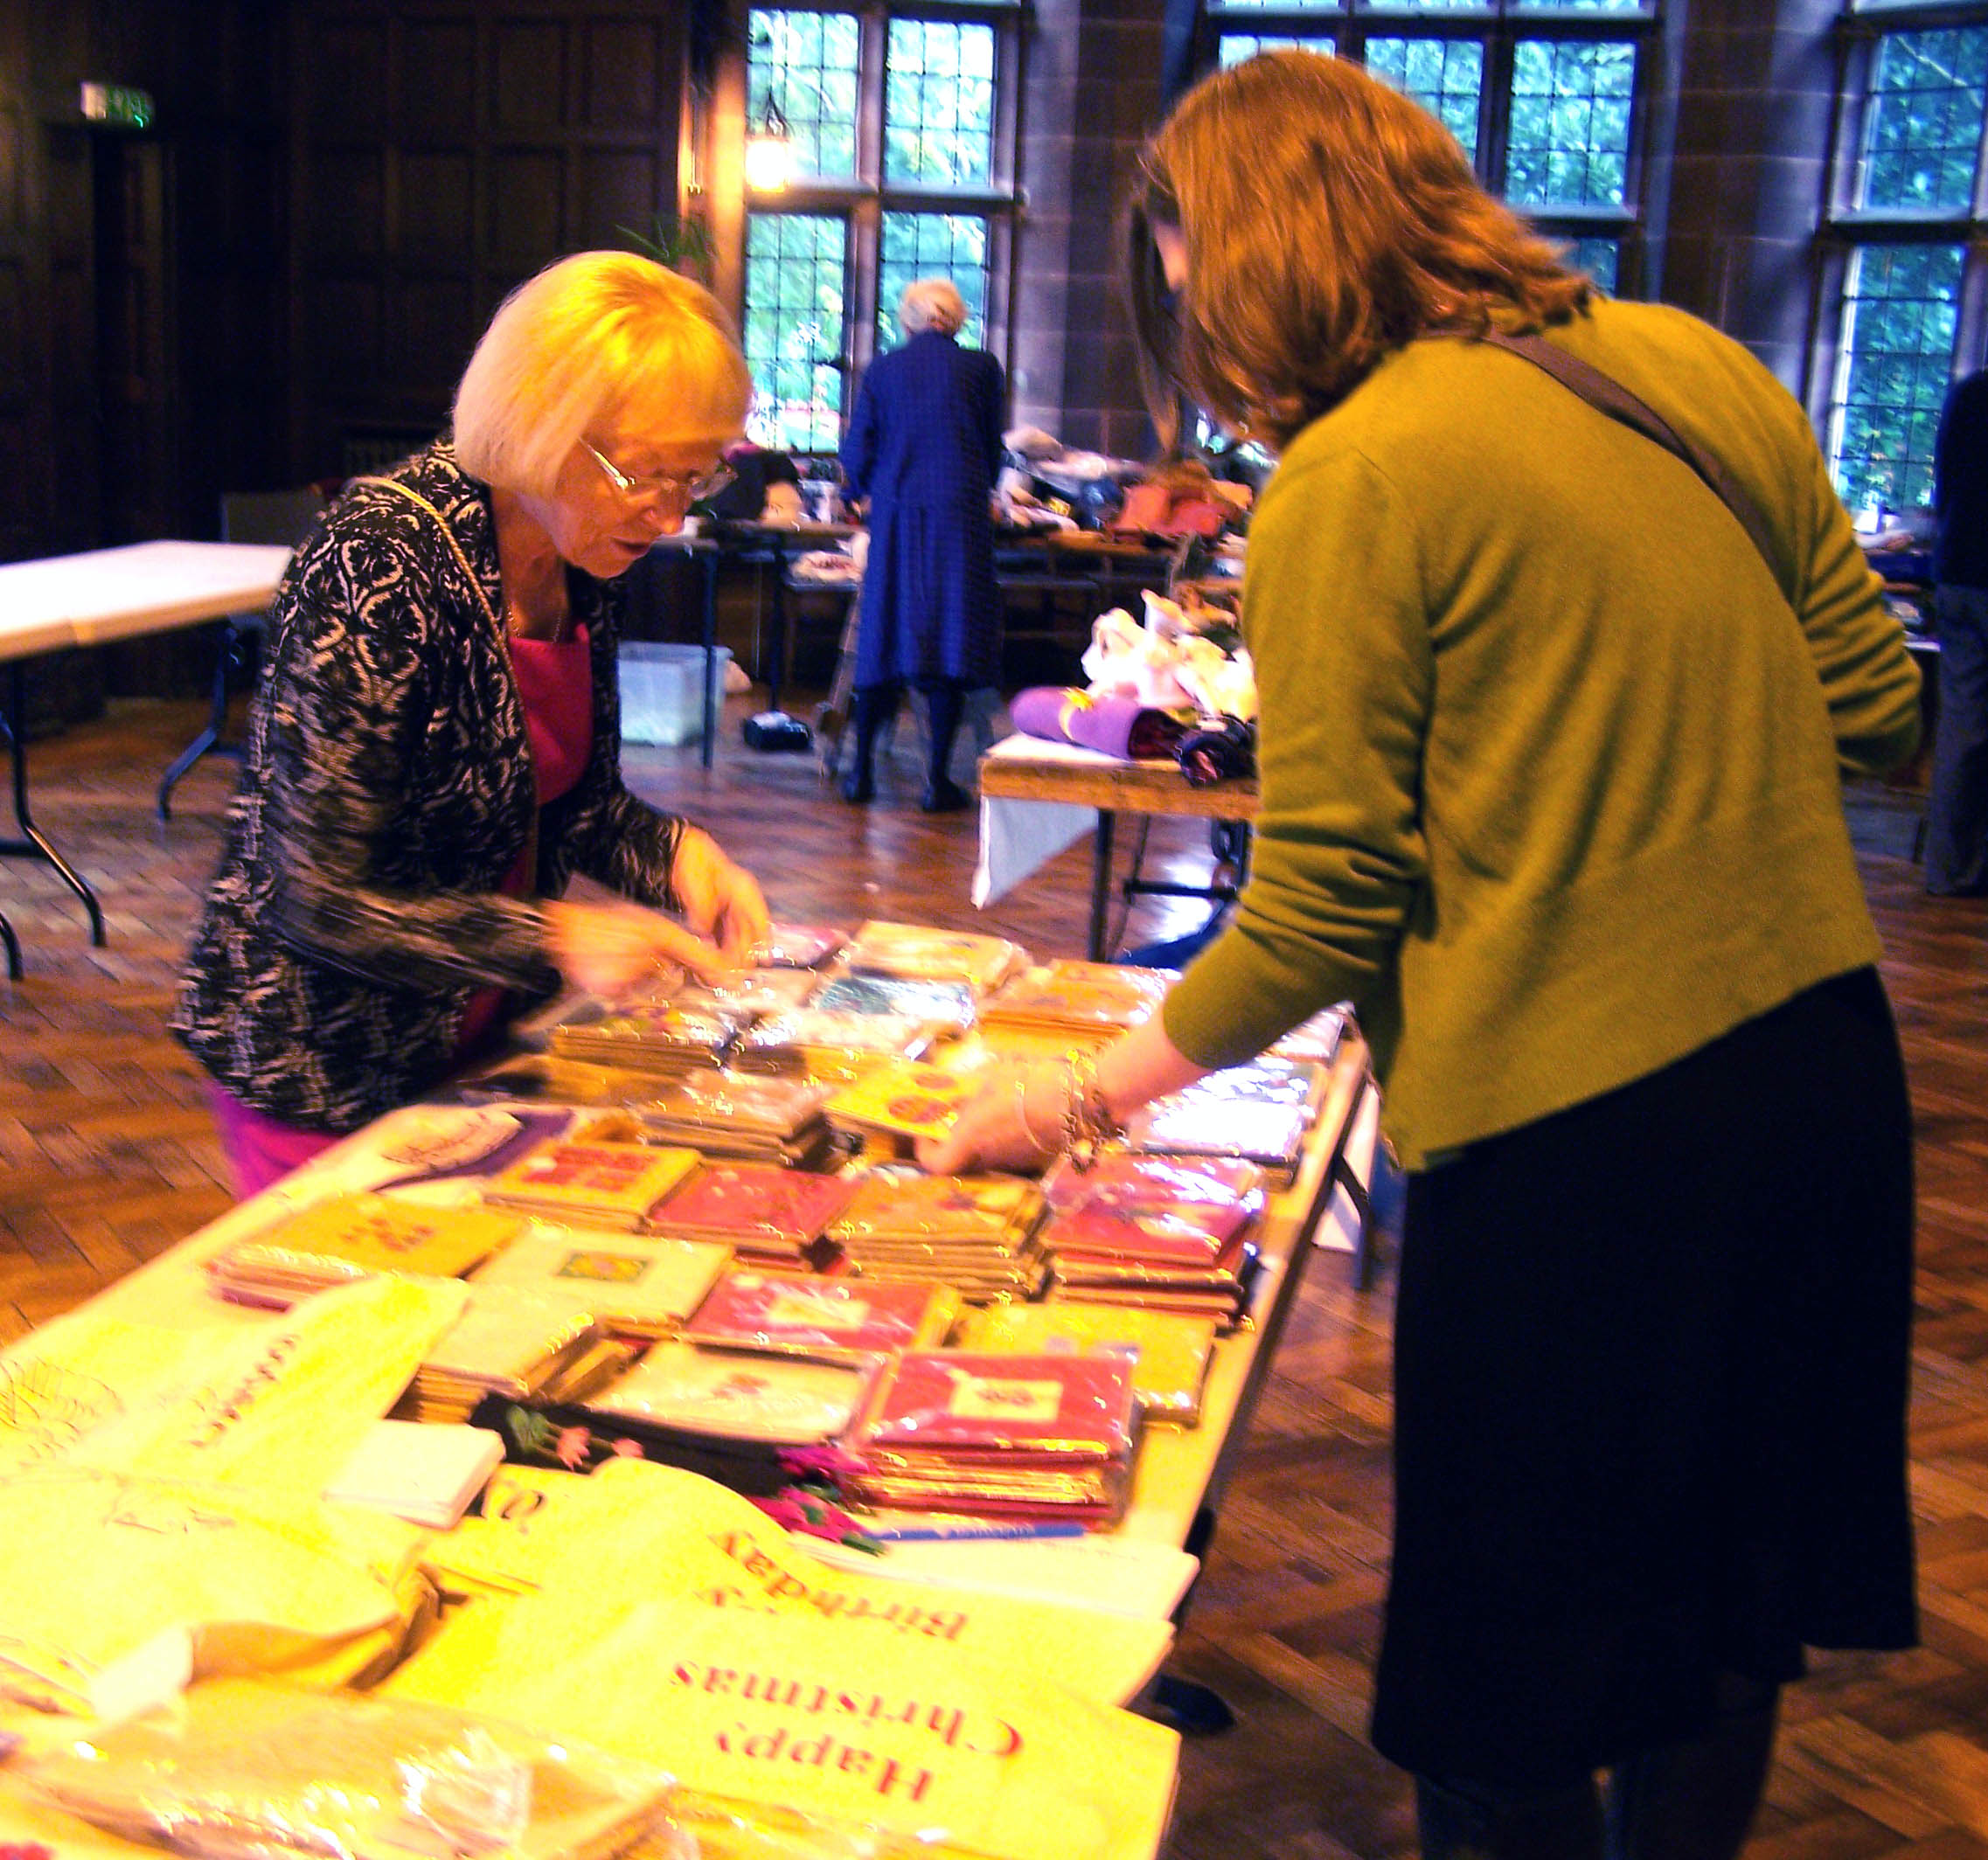 Kathy and Karen are preparing the Sreepur Charity table